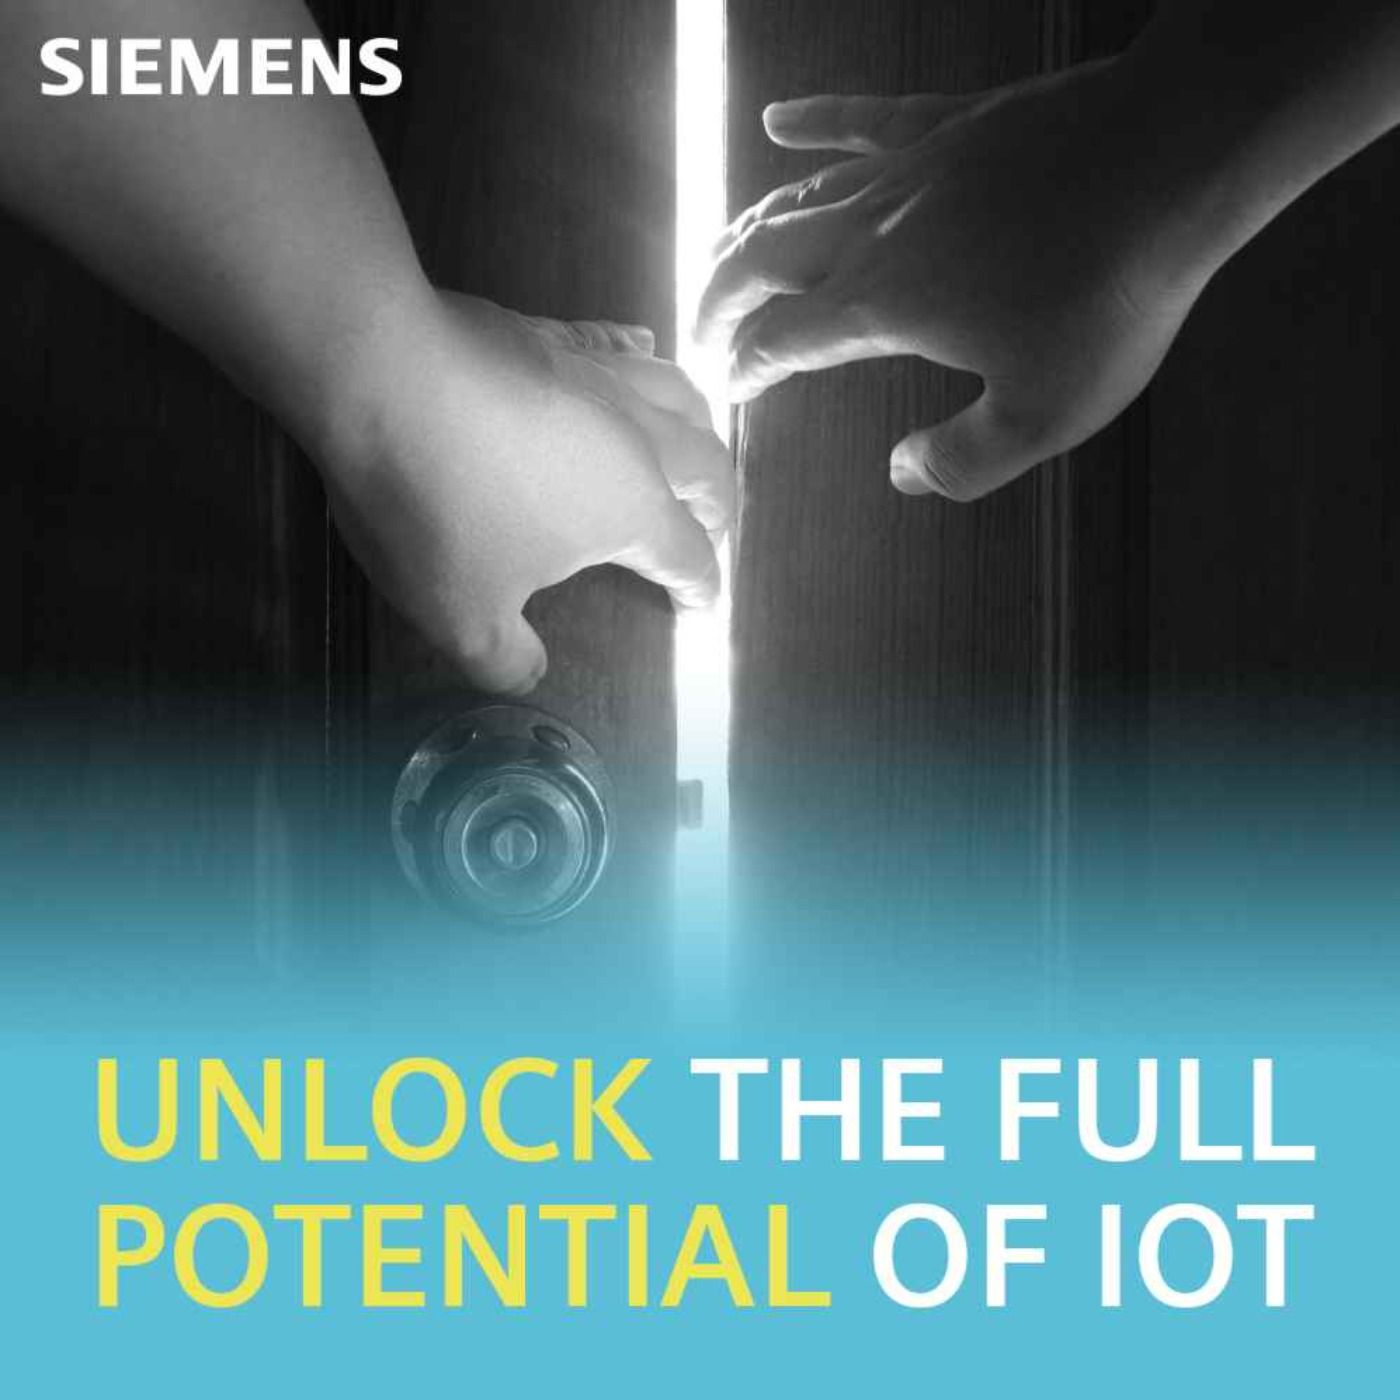 Protecting the future by securing it today: How to tackle cybersecurity in IoT